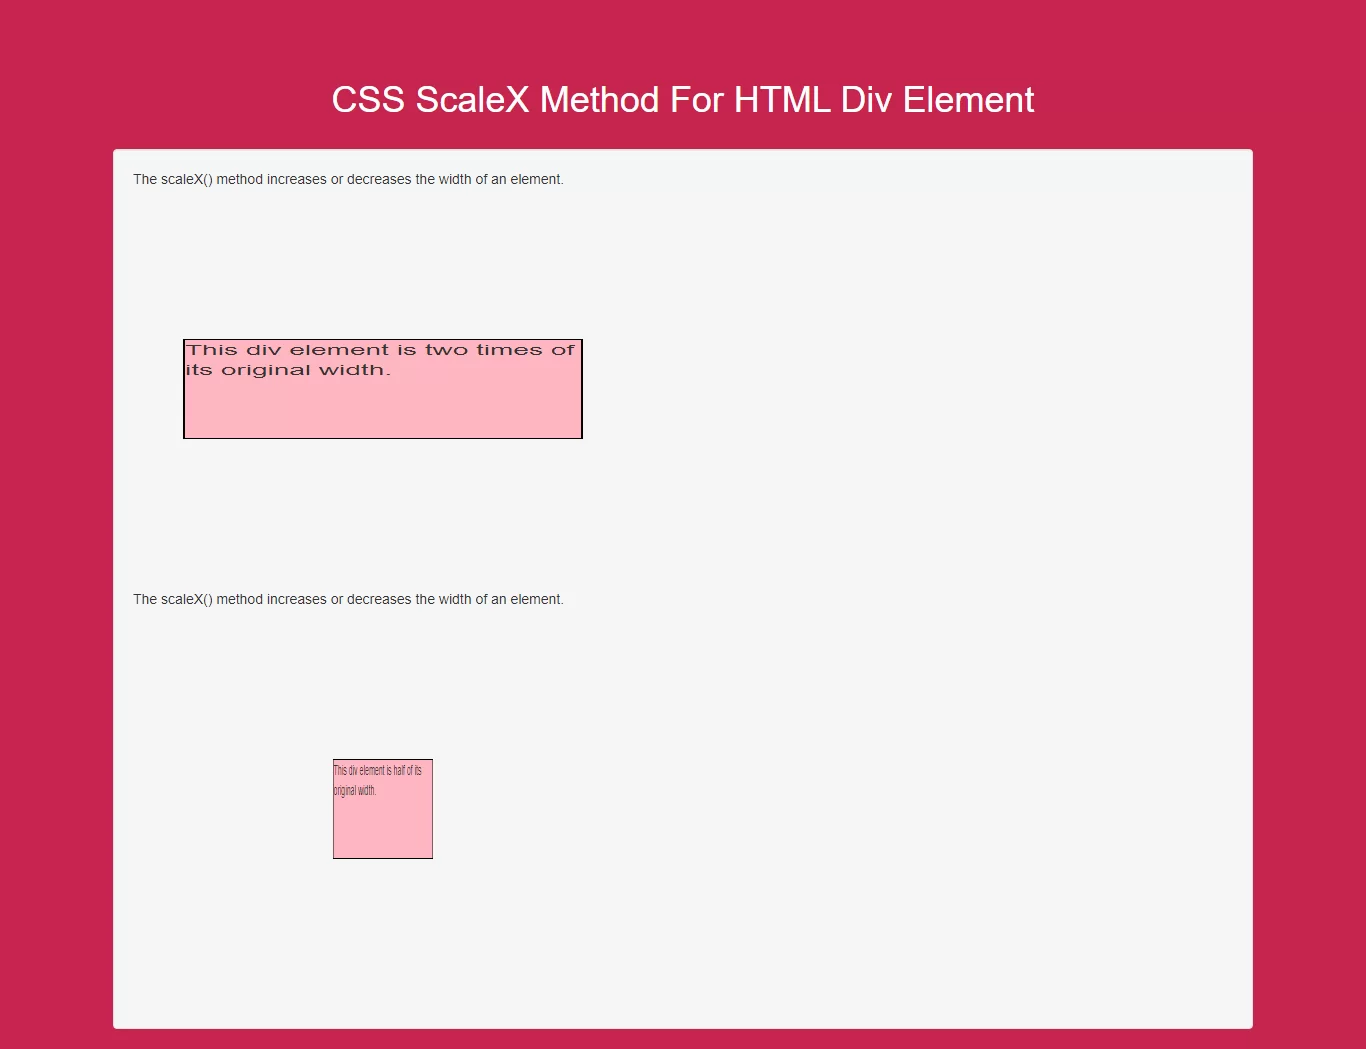 How Do I Use CSS ScaleX Method For HTML Div Element